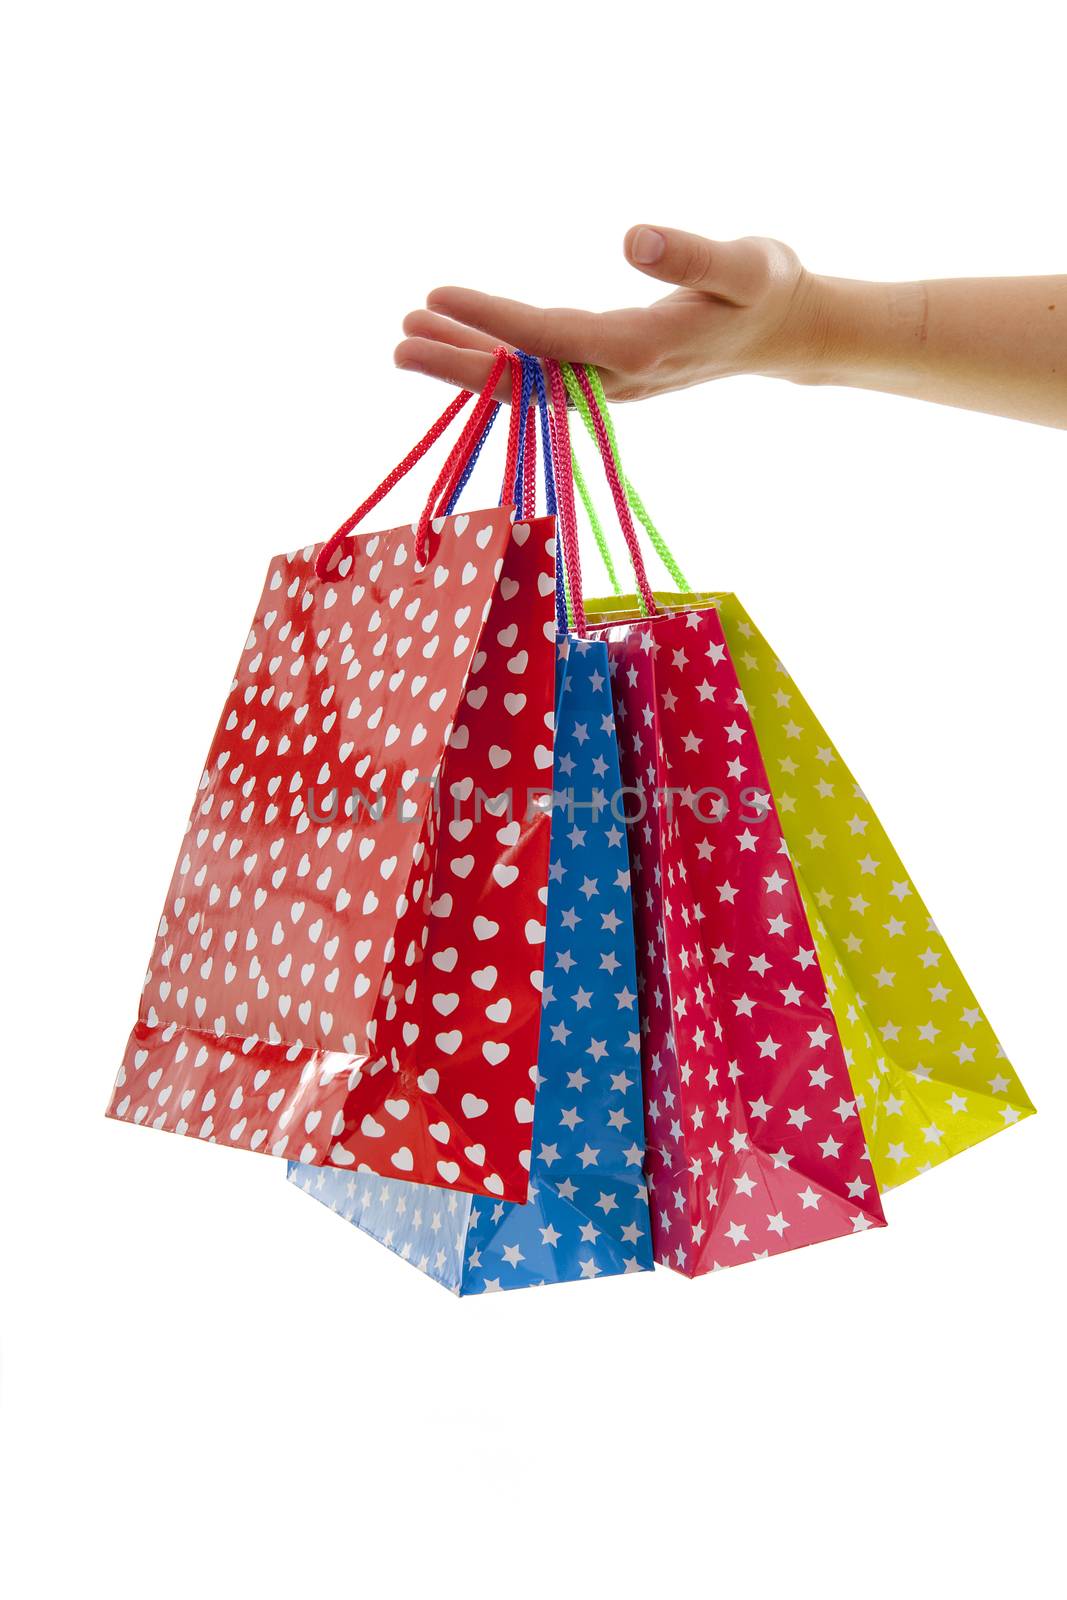 Hand is holding colorful shopping bags over white background